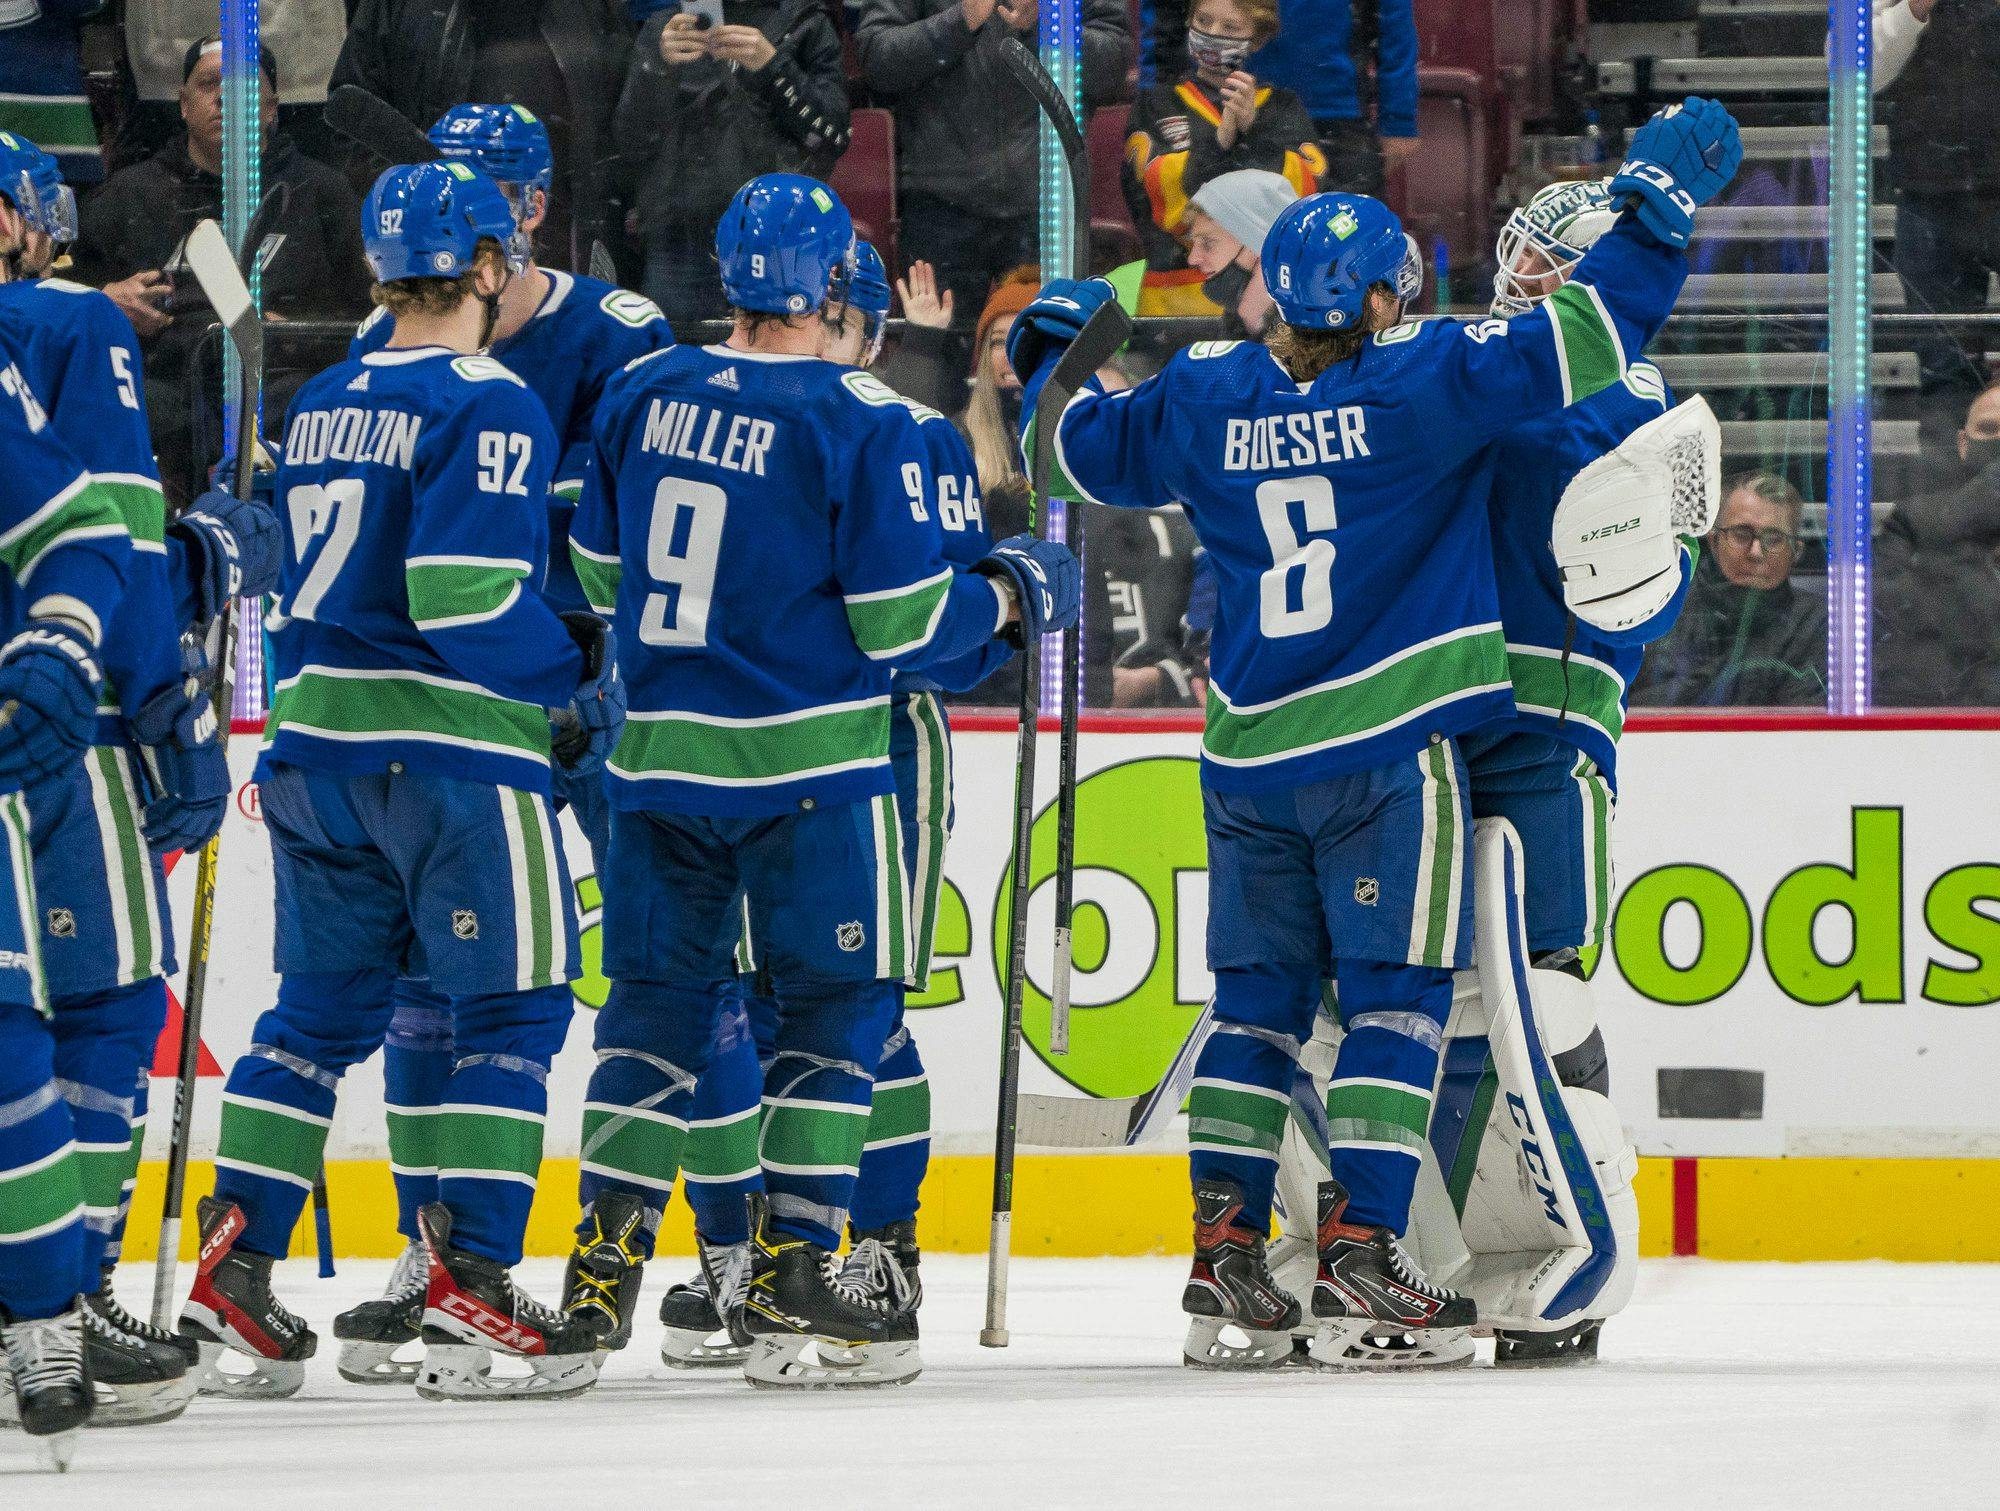 Vancouver fans give Canucks a standing ovation as the team wins in Bruce Boudreau’s debut